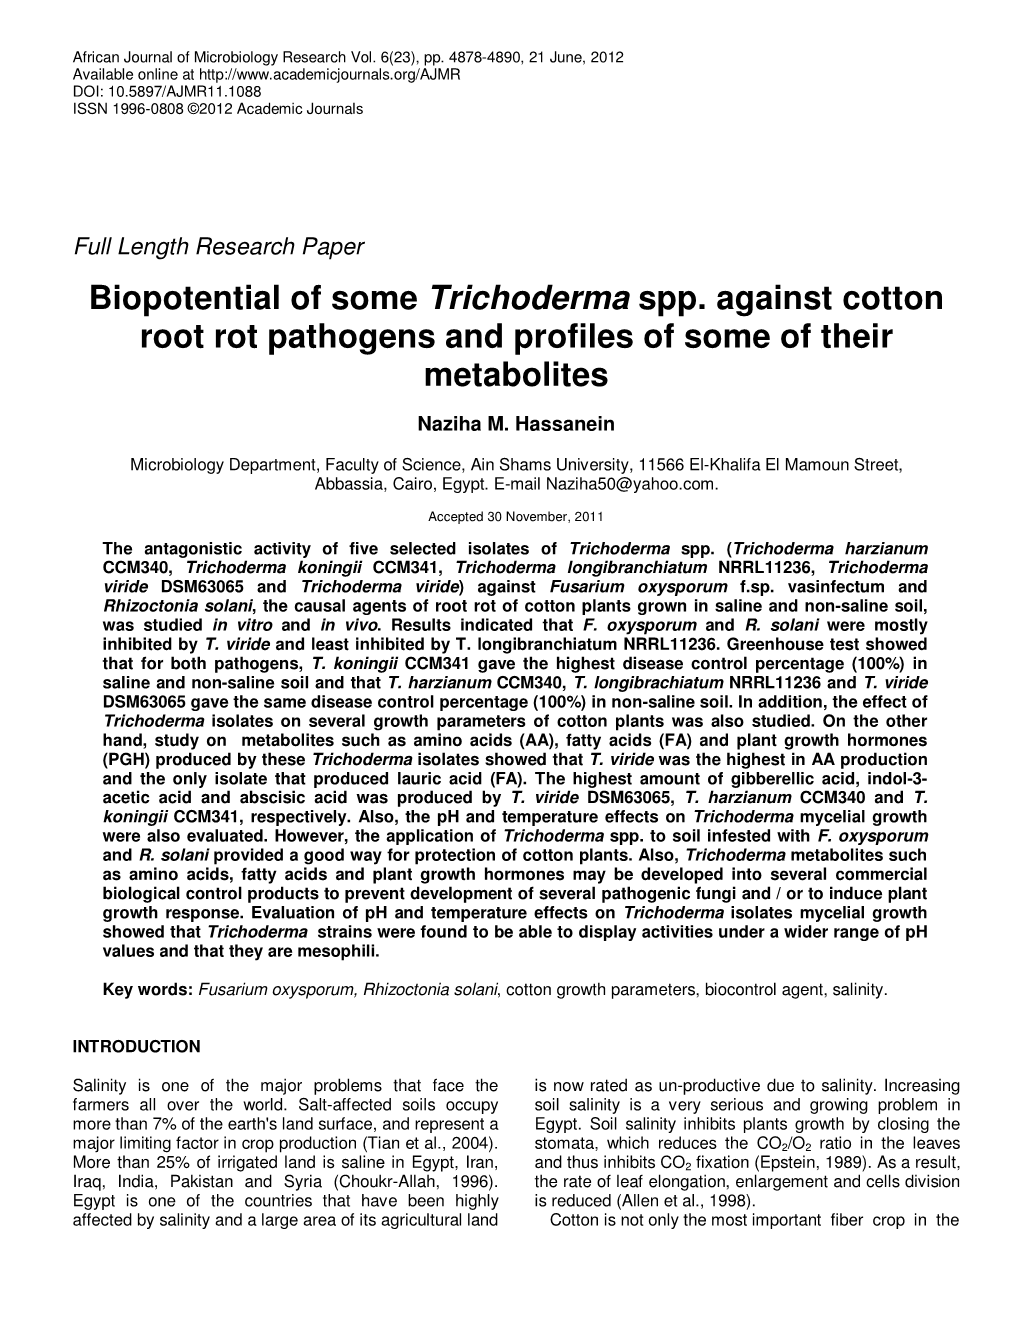 Biopotential of Some Trichoderma Spp. Against Cotton Root Rot Pathogens and Profiles of Some of Their Metabolites